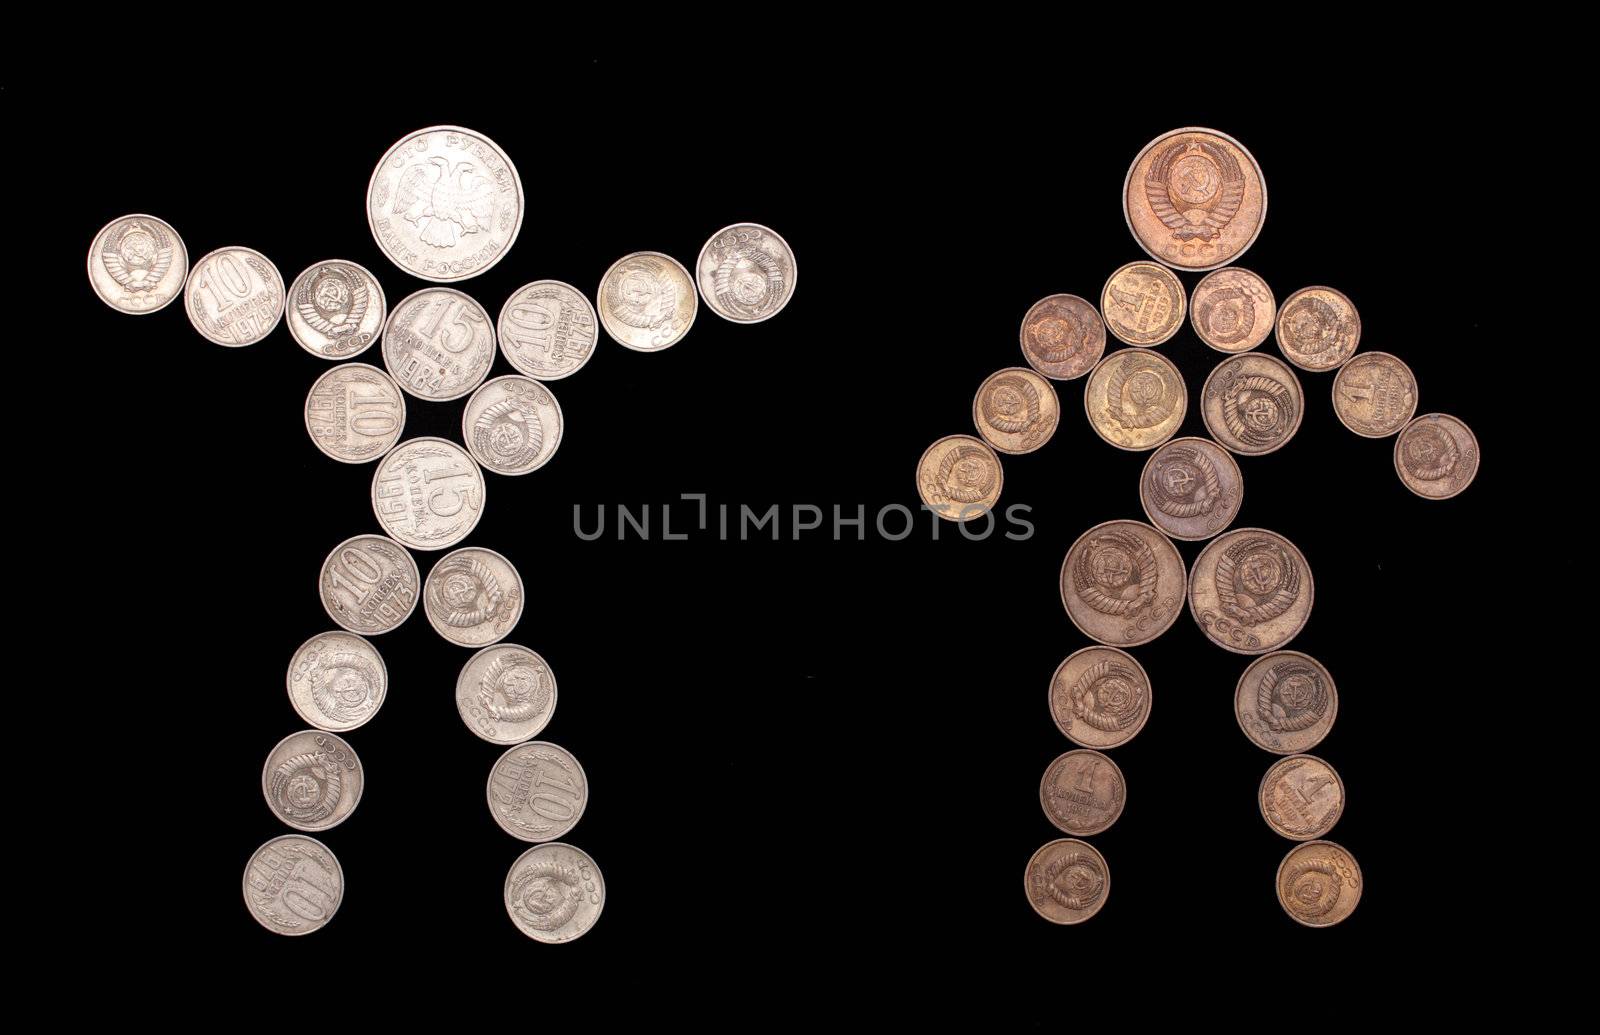 business symbol - man and woman silhouette of coins